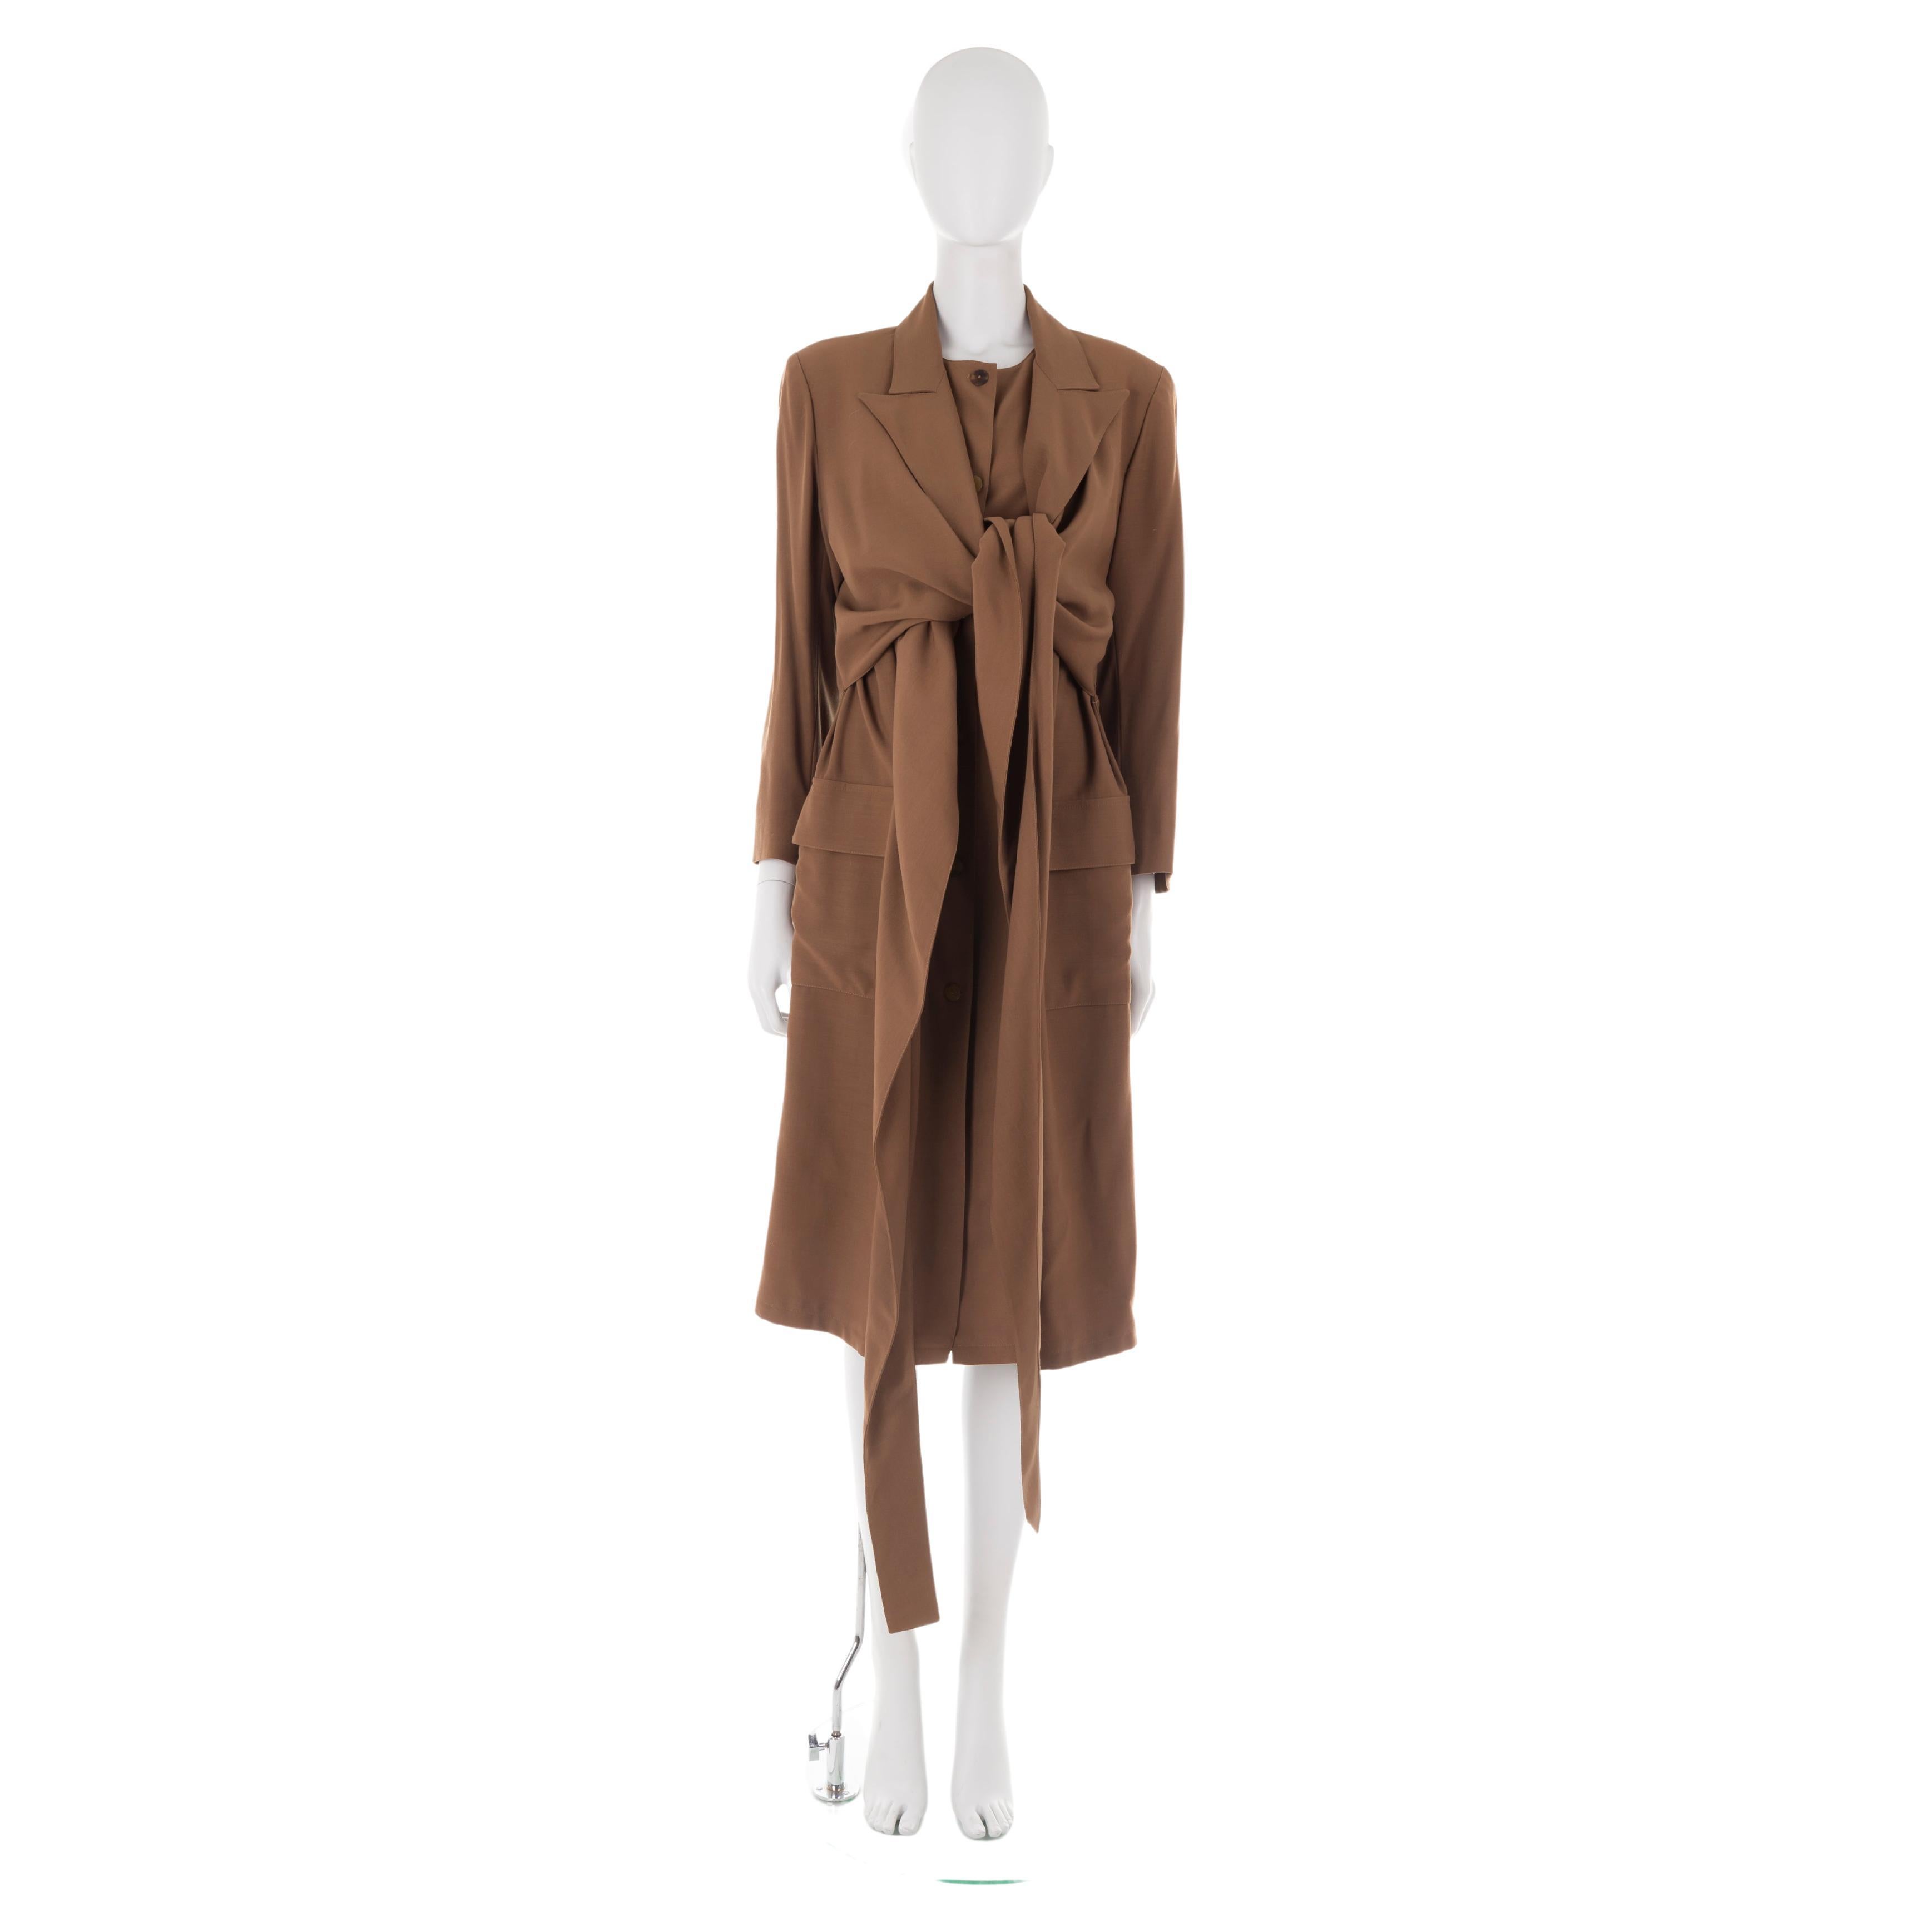 - Jean Paul Gaultier tobacco wool coat
- Sold by Gold Palms Vintage
- Fall/Winter 1983
- Produced by Gibo
- Double-structured trench coat with knotted overlay (adjustable at will)
- Button-up fastening underlay
- Two front maxi pockets
